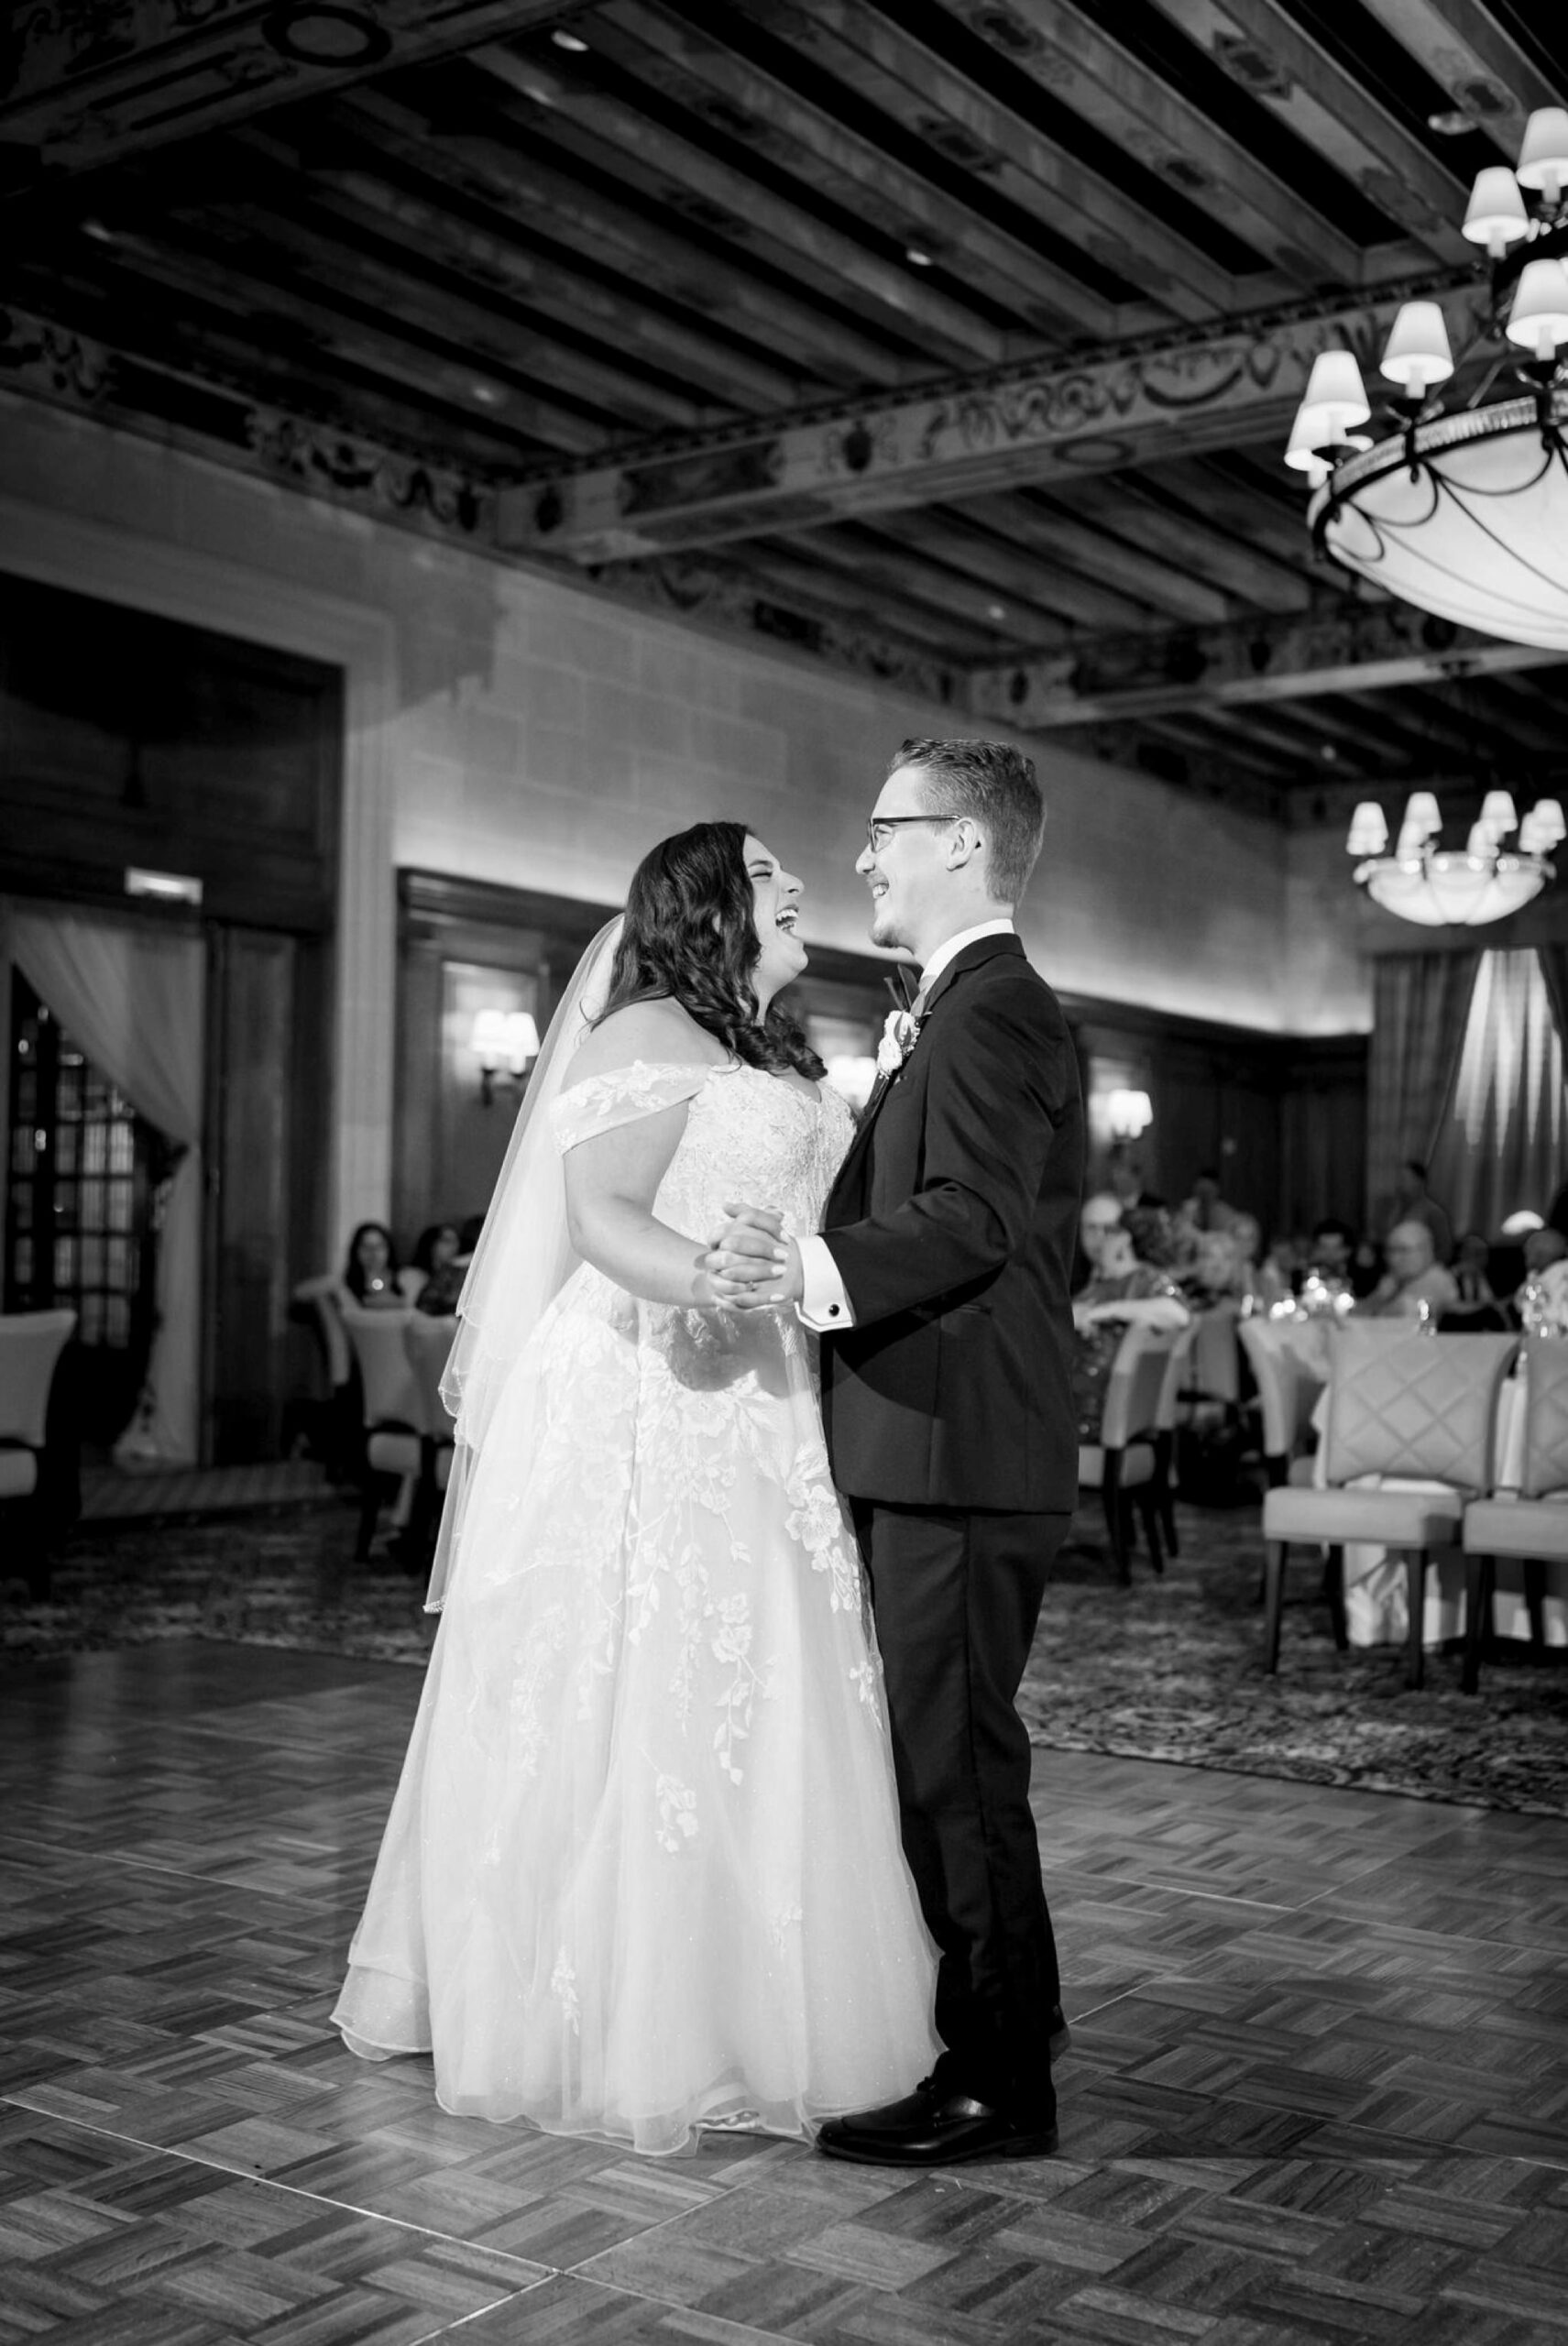 The bride and groom share their first dance at a Detroit Athletic Club wedding.